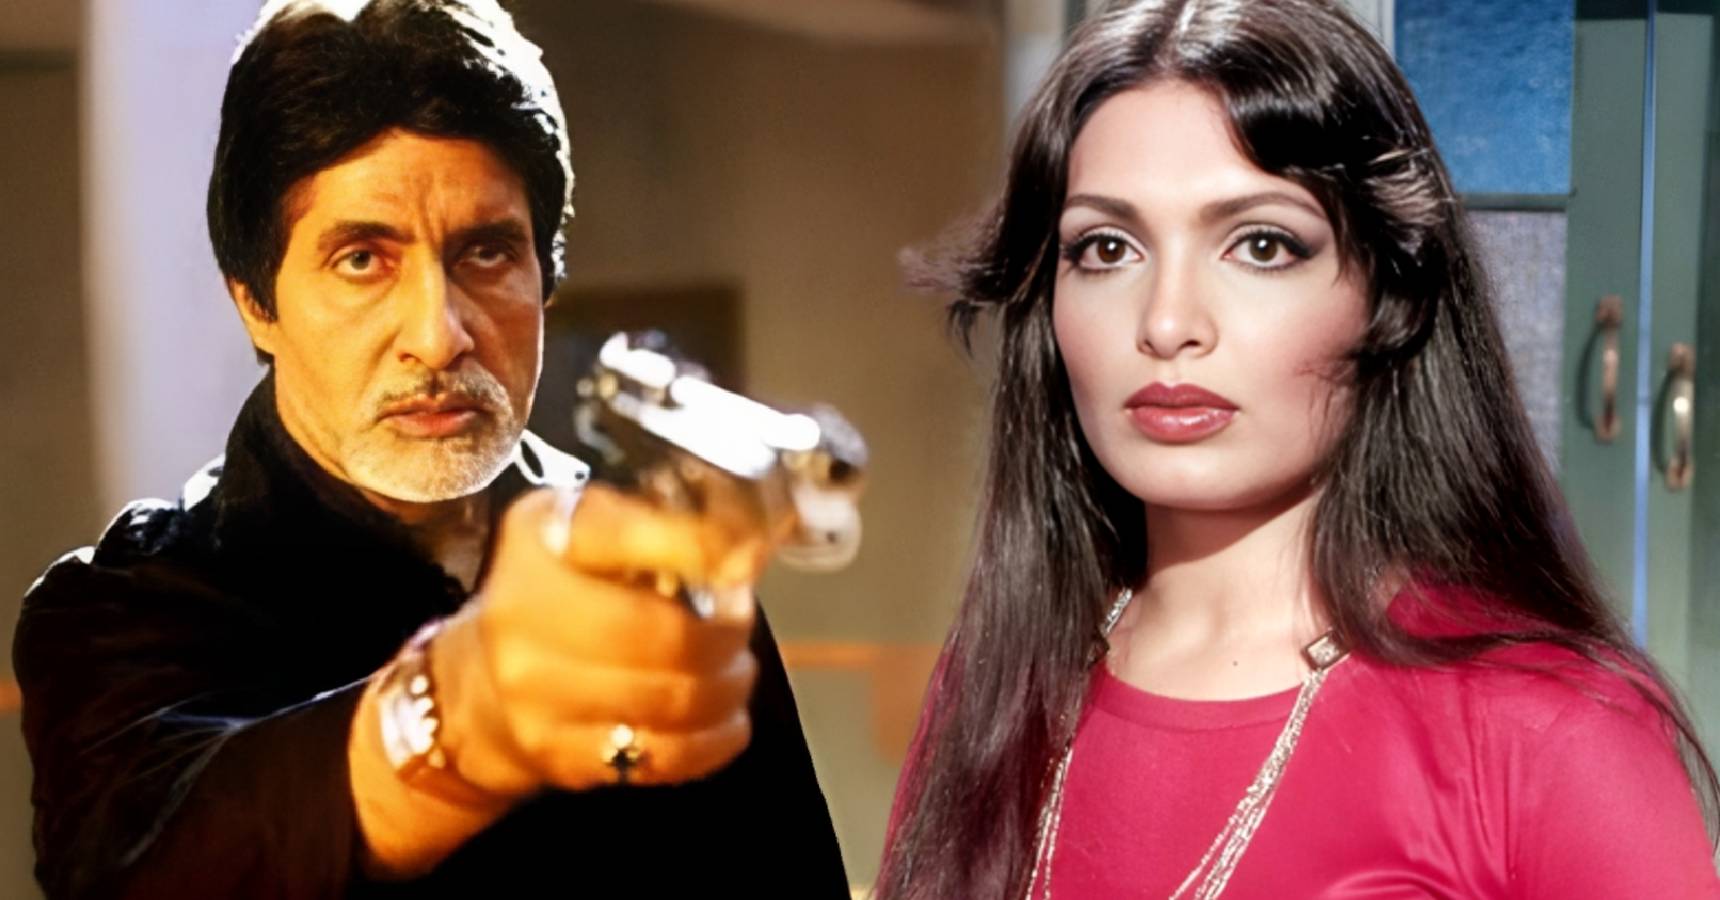 When Bollywood actress Parveen Babi accused Amitabh Bachchan of trying to kill her